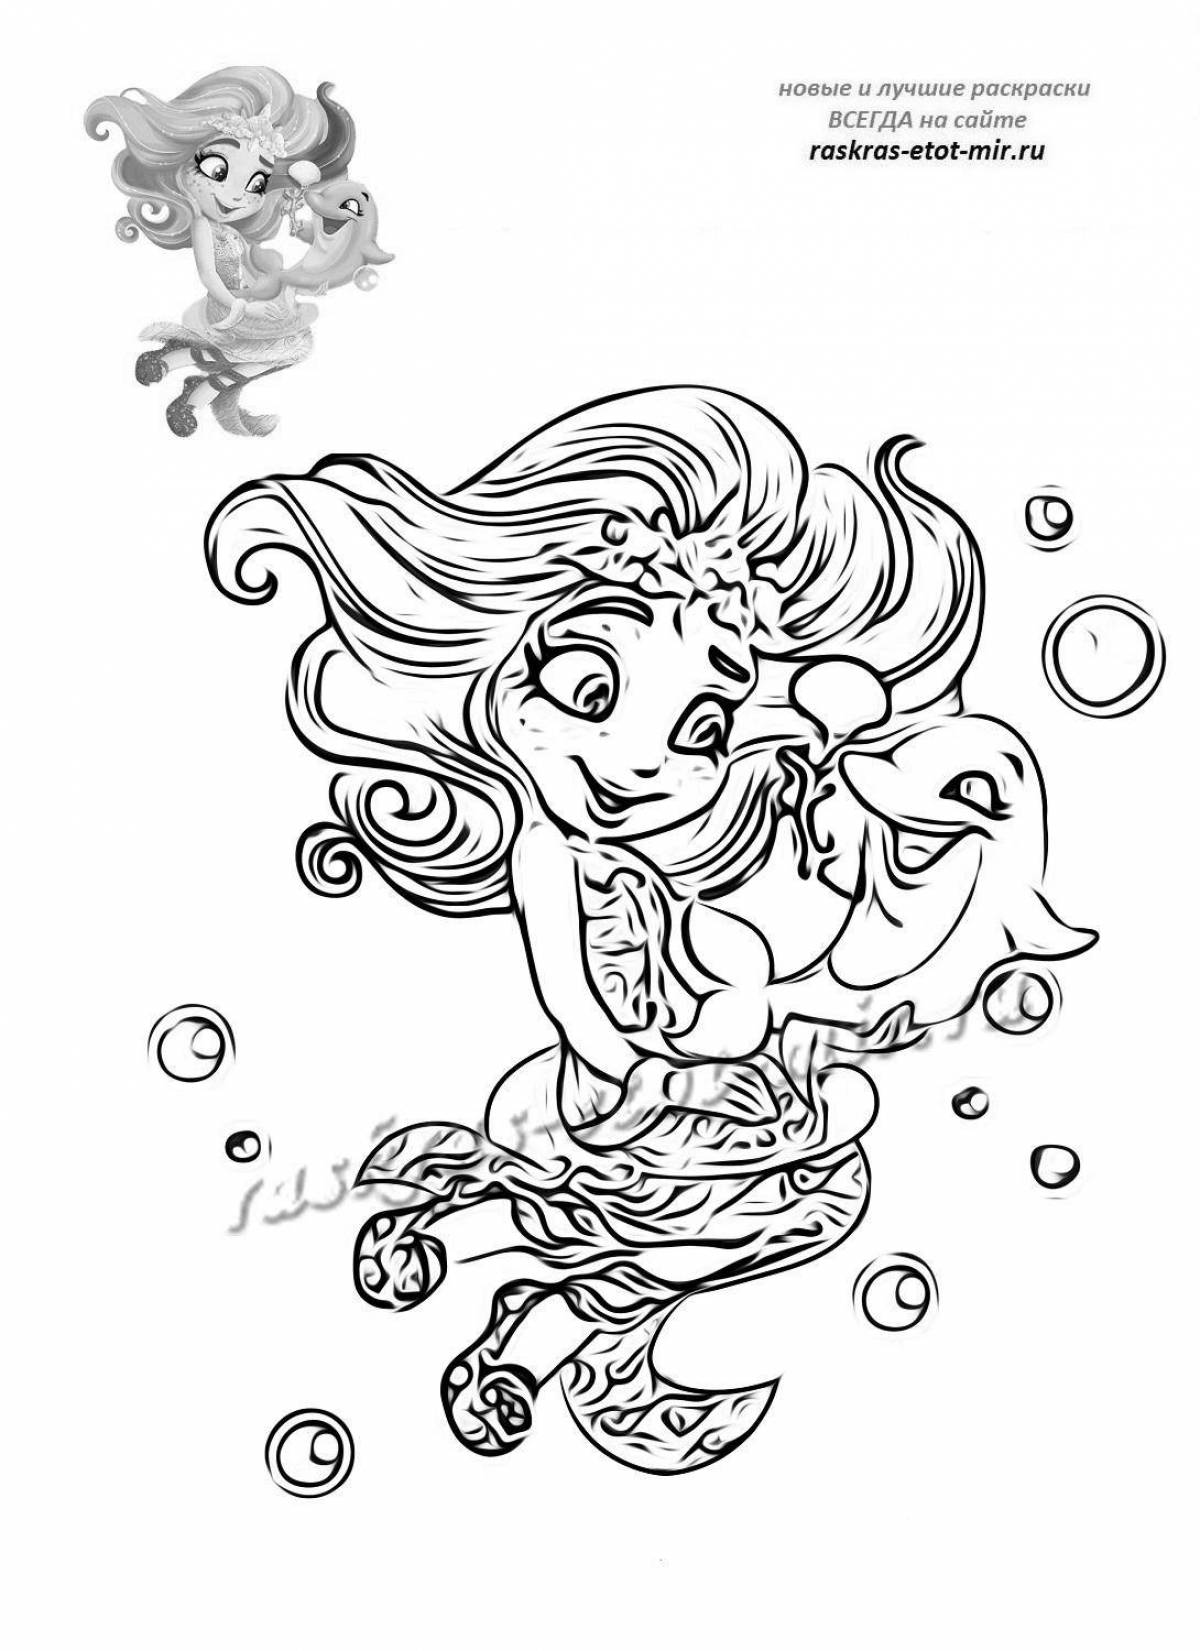 Coloring page happy anhanchymus